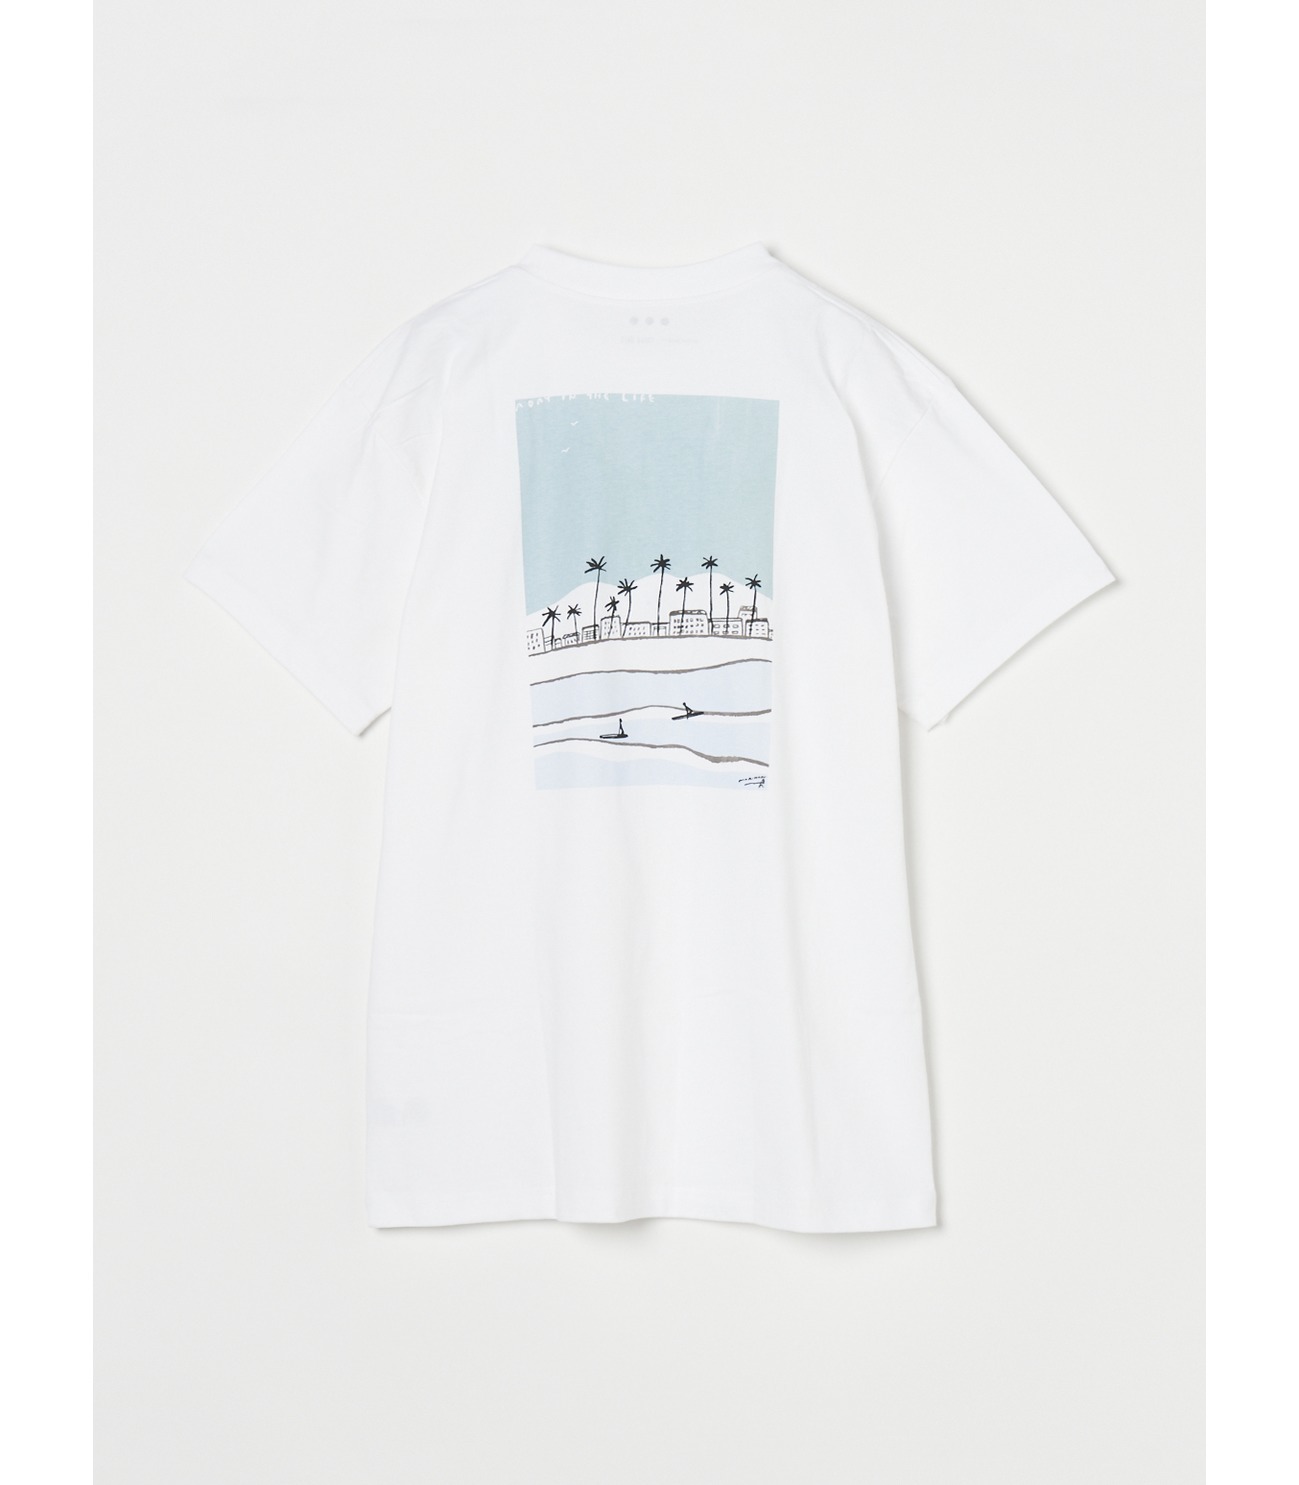 Unisex graphic tee 1 s/s crewneck 詳細画像 a day in the sun 1